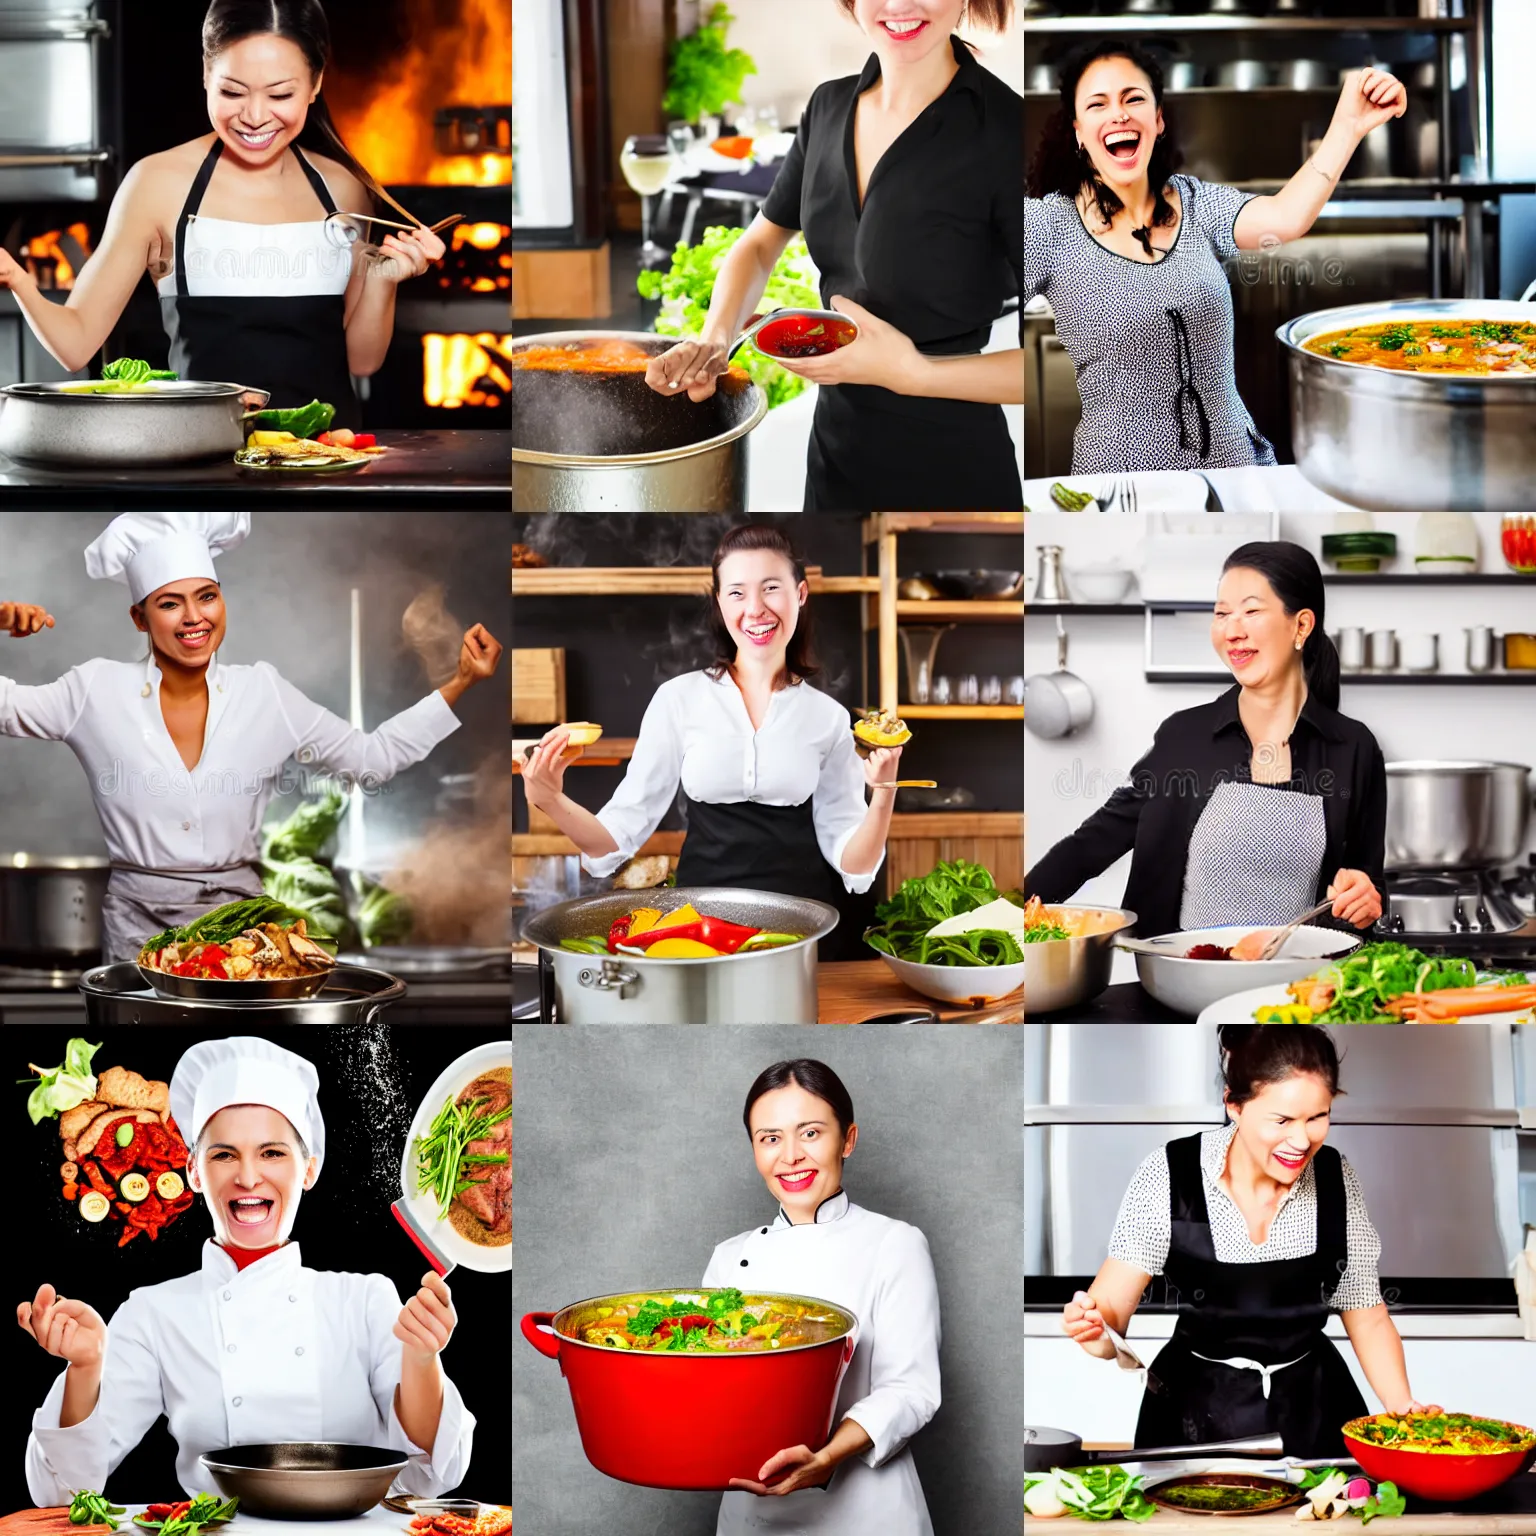 Prompt: Photo stock of a woman put by a maitre d in a large cooking pot and delighted to be cooked for a chic restaurant